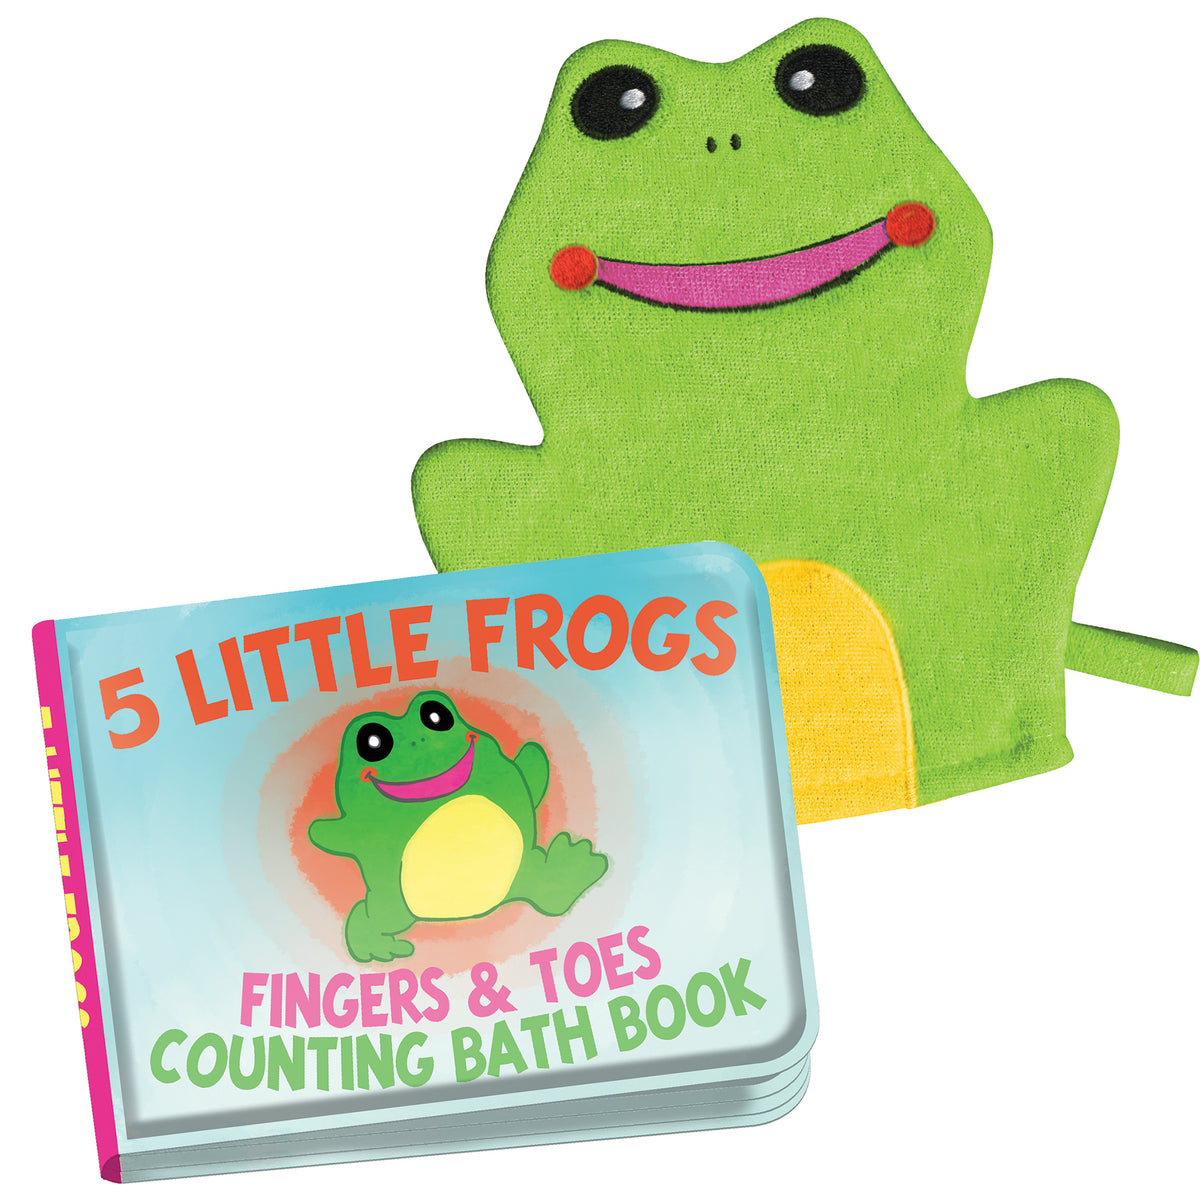 Five Little Frogs Fingers & Toes Bath Counting Book & Mitt – Rockin' A B